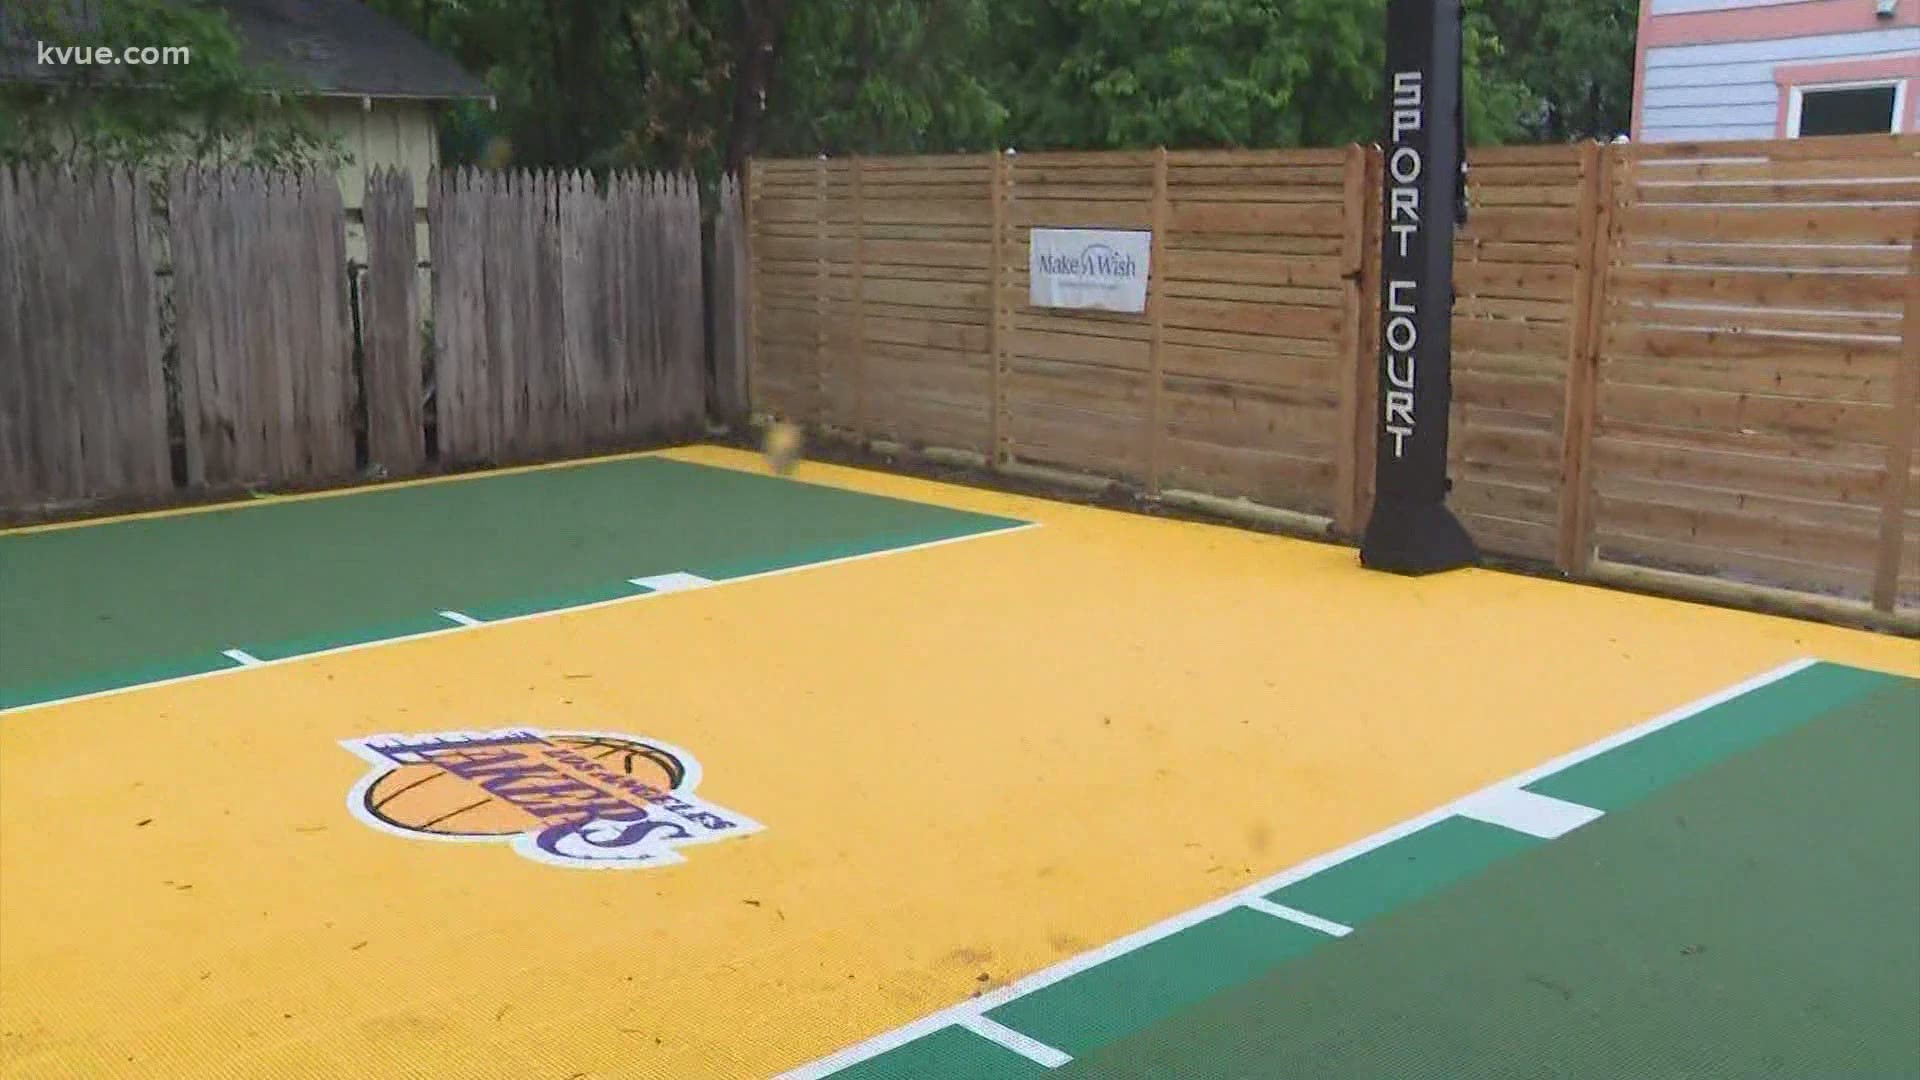 Solomon's wish of having his own basketball court is coming true.